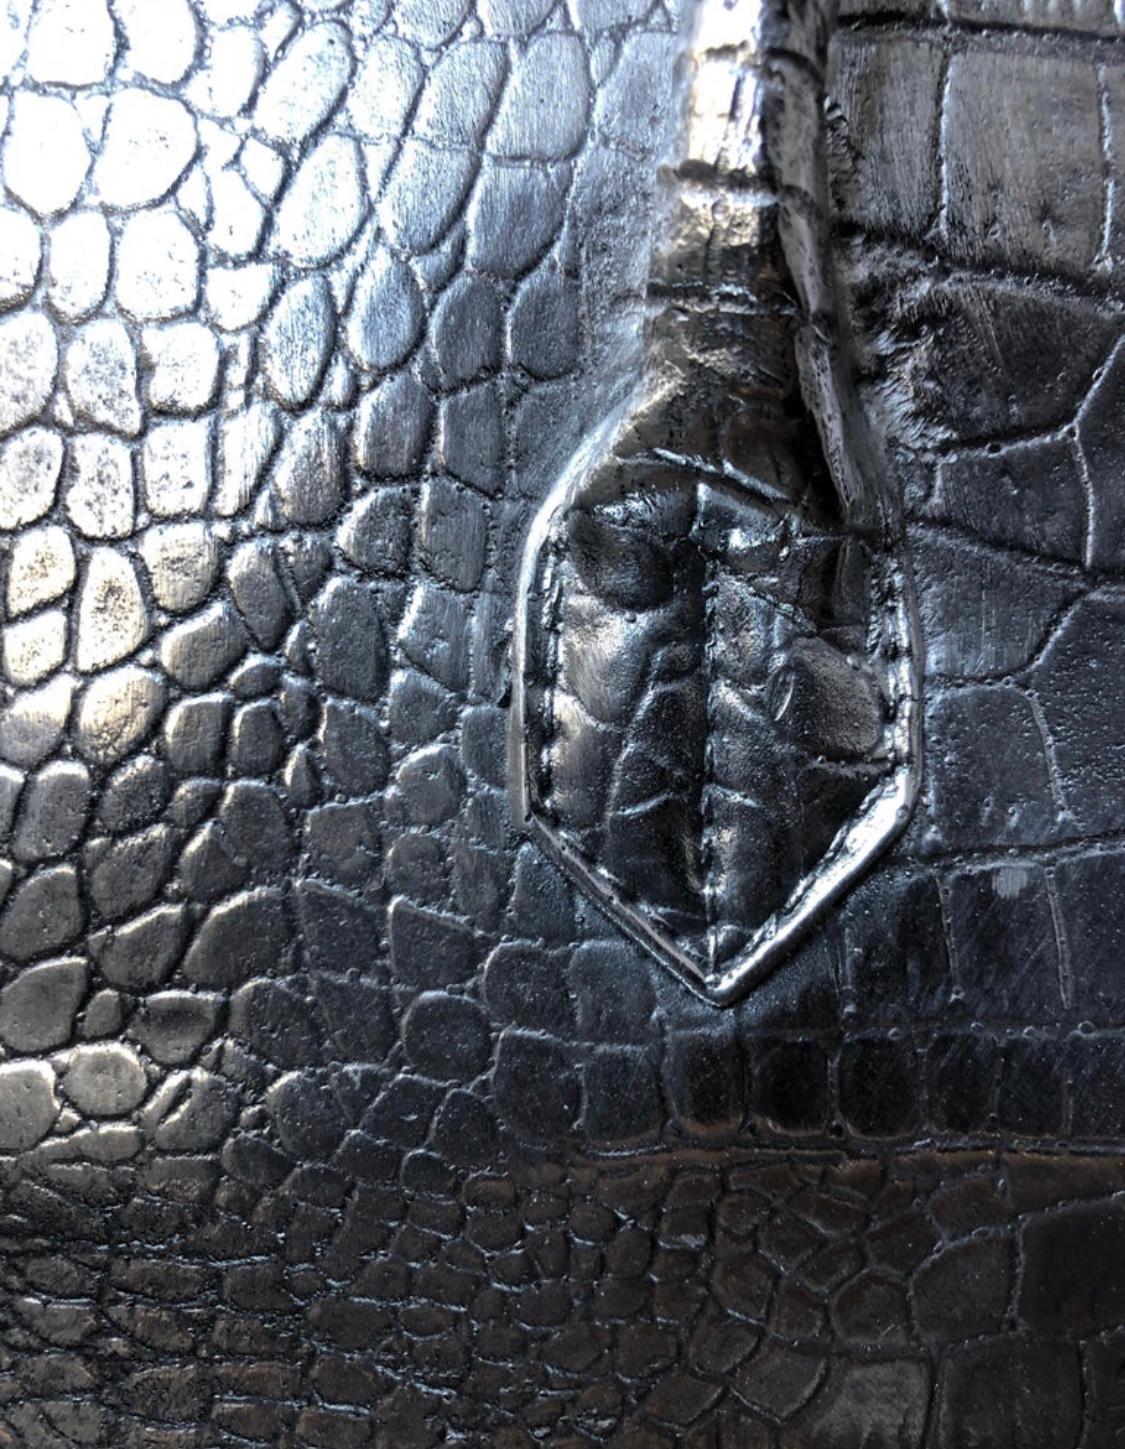 Birkin Mon Amour, Birkin Pour Toujours “Birkin for Ever” is a sculpture bag in aluminium crocodile print, signed Oskian.
The french artist Love to work with aluminium cast, he is specializing in animals real size sculpture and monumental pieces.